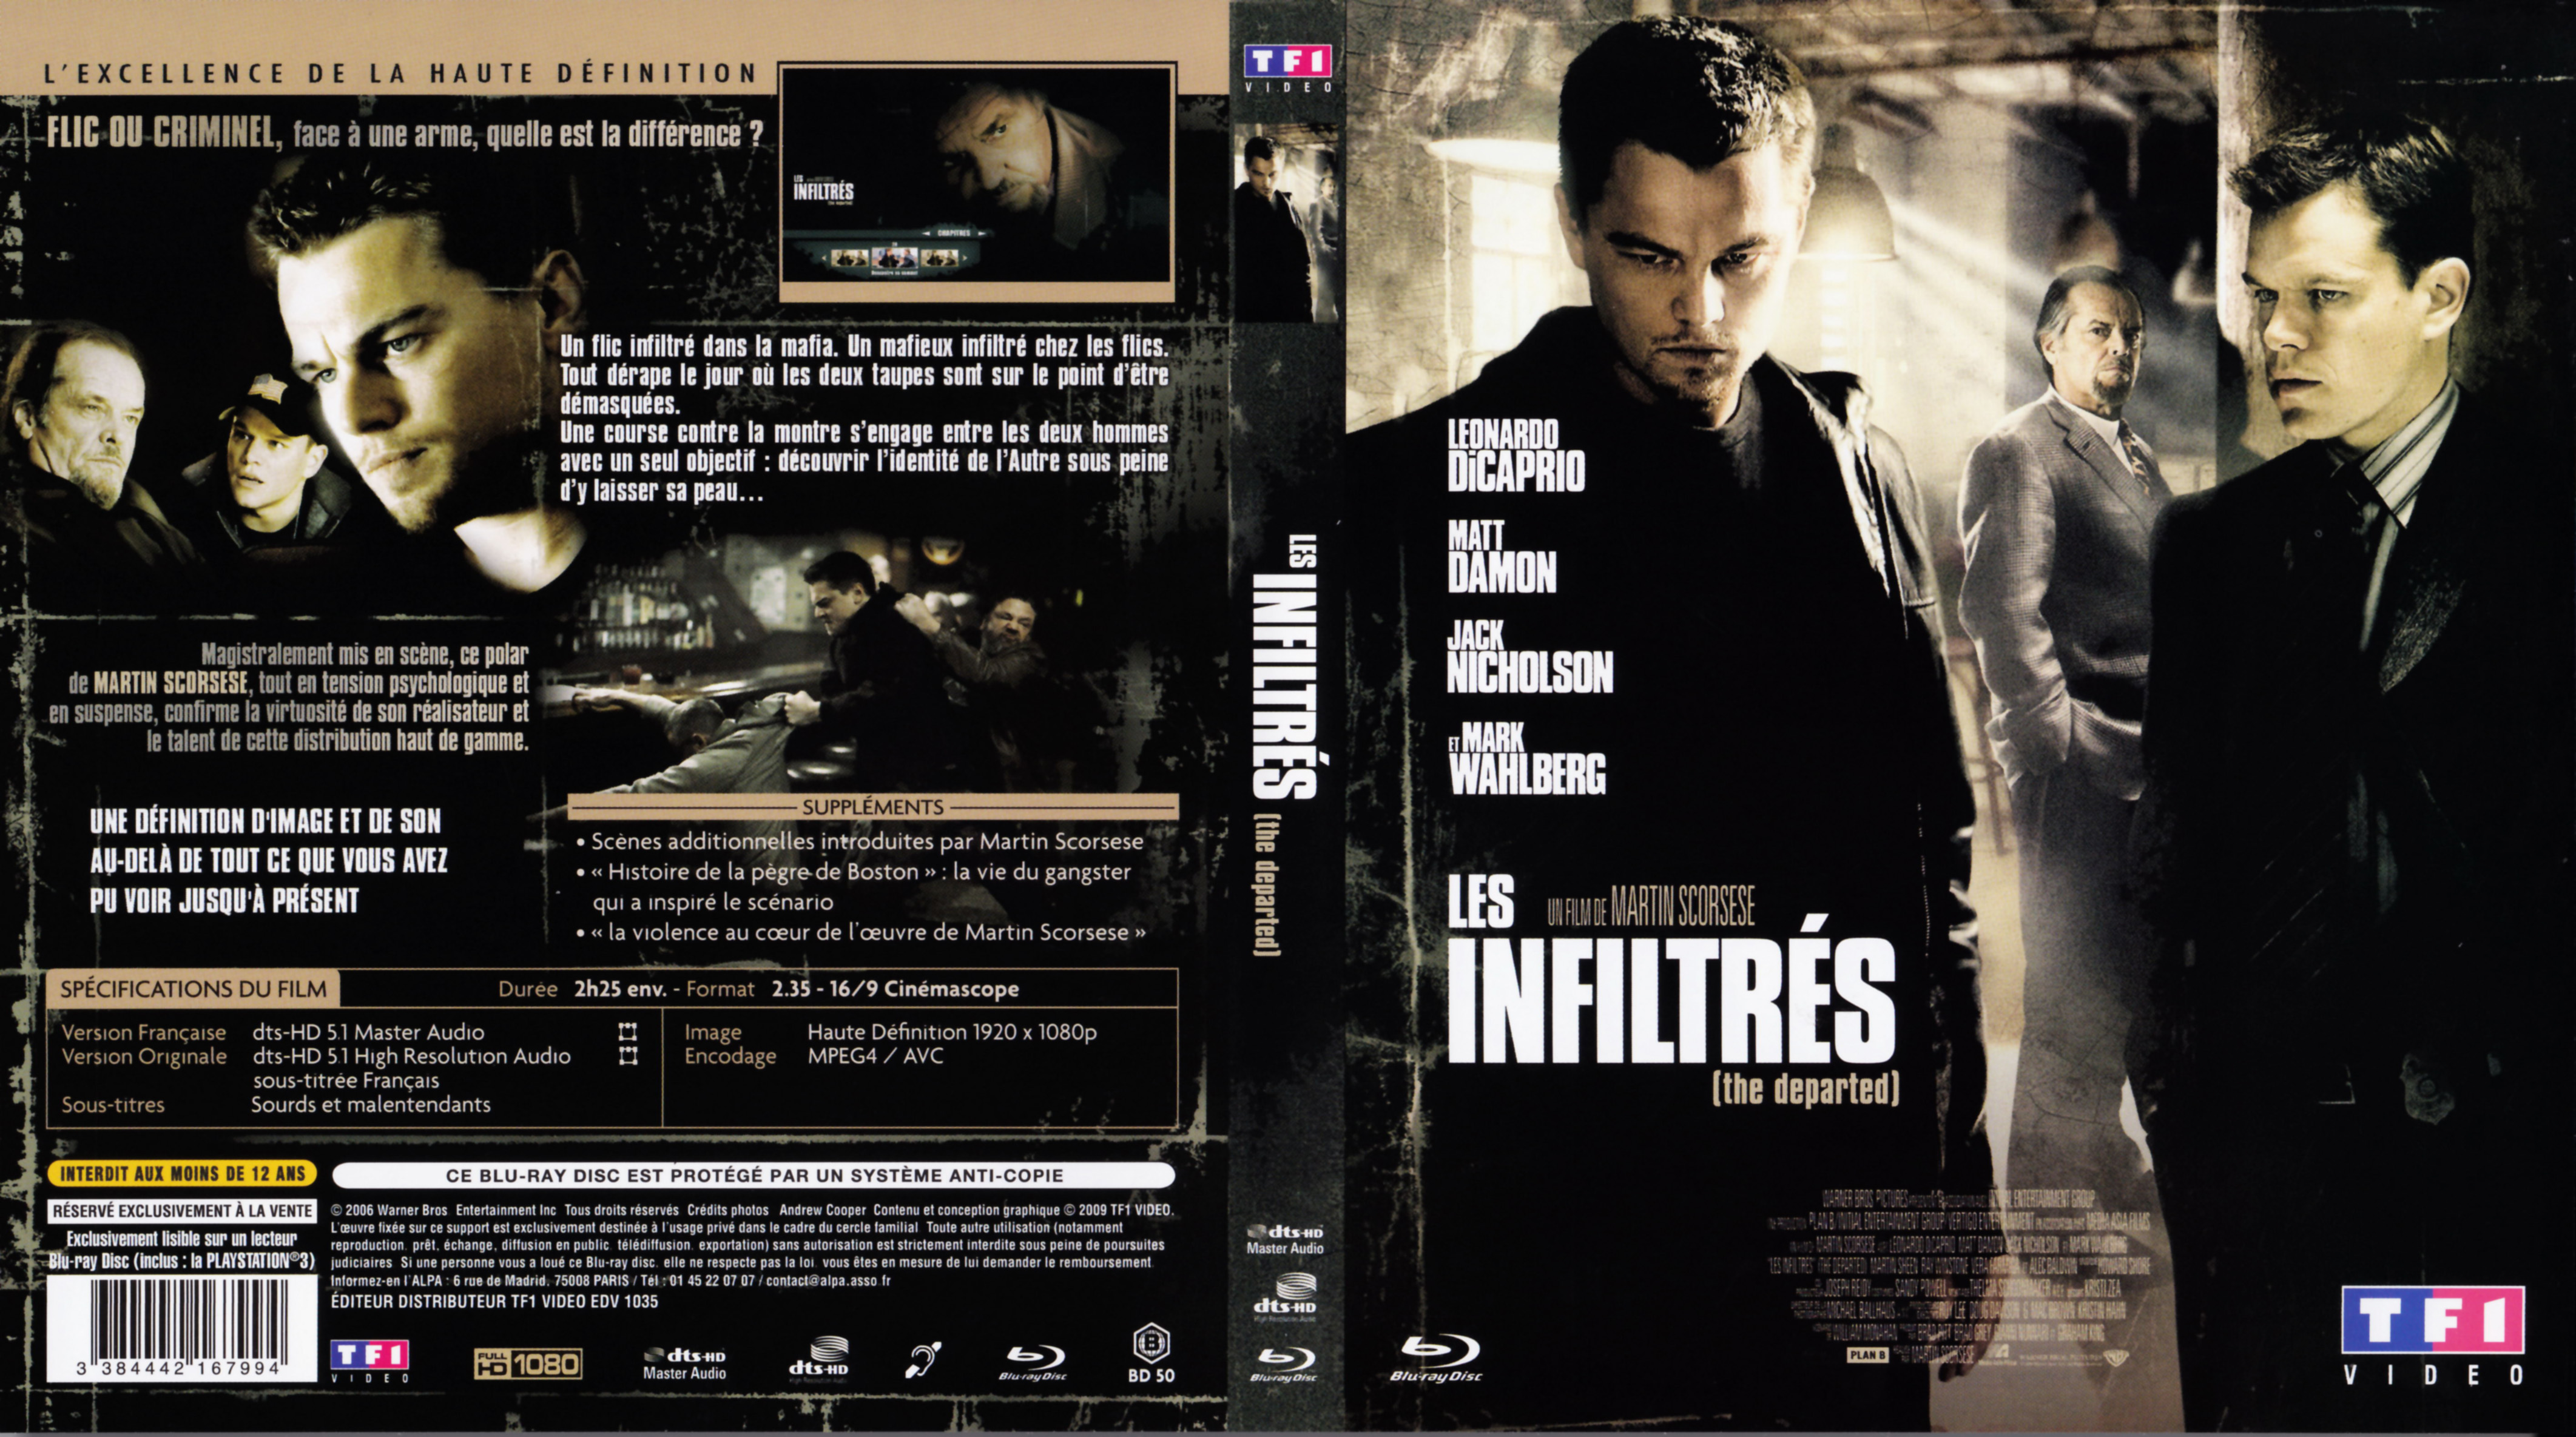 Jaquette DVD Les infiltrs (BLU-RAY)